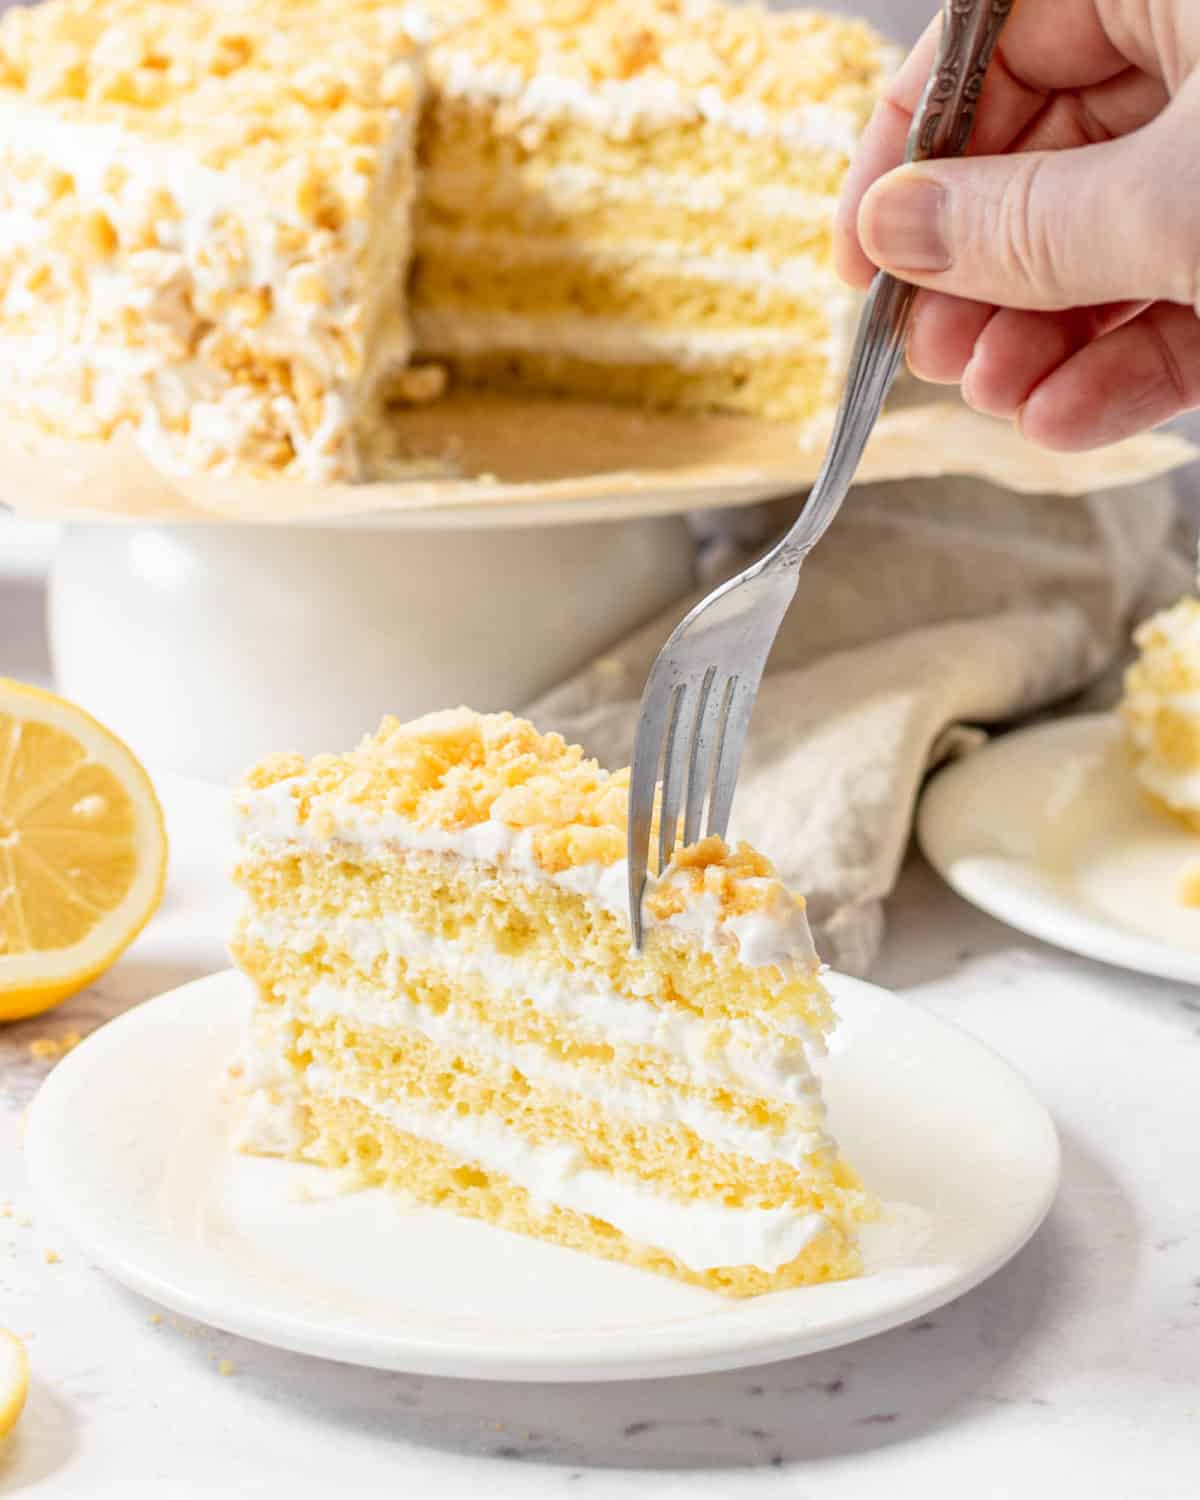 A fork pushing down into a slice of lemon crunch cake.